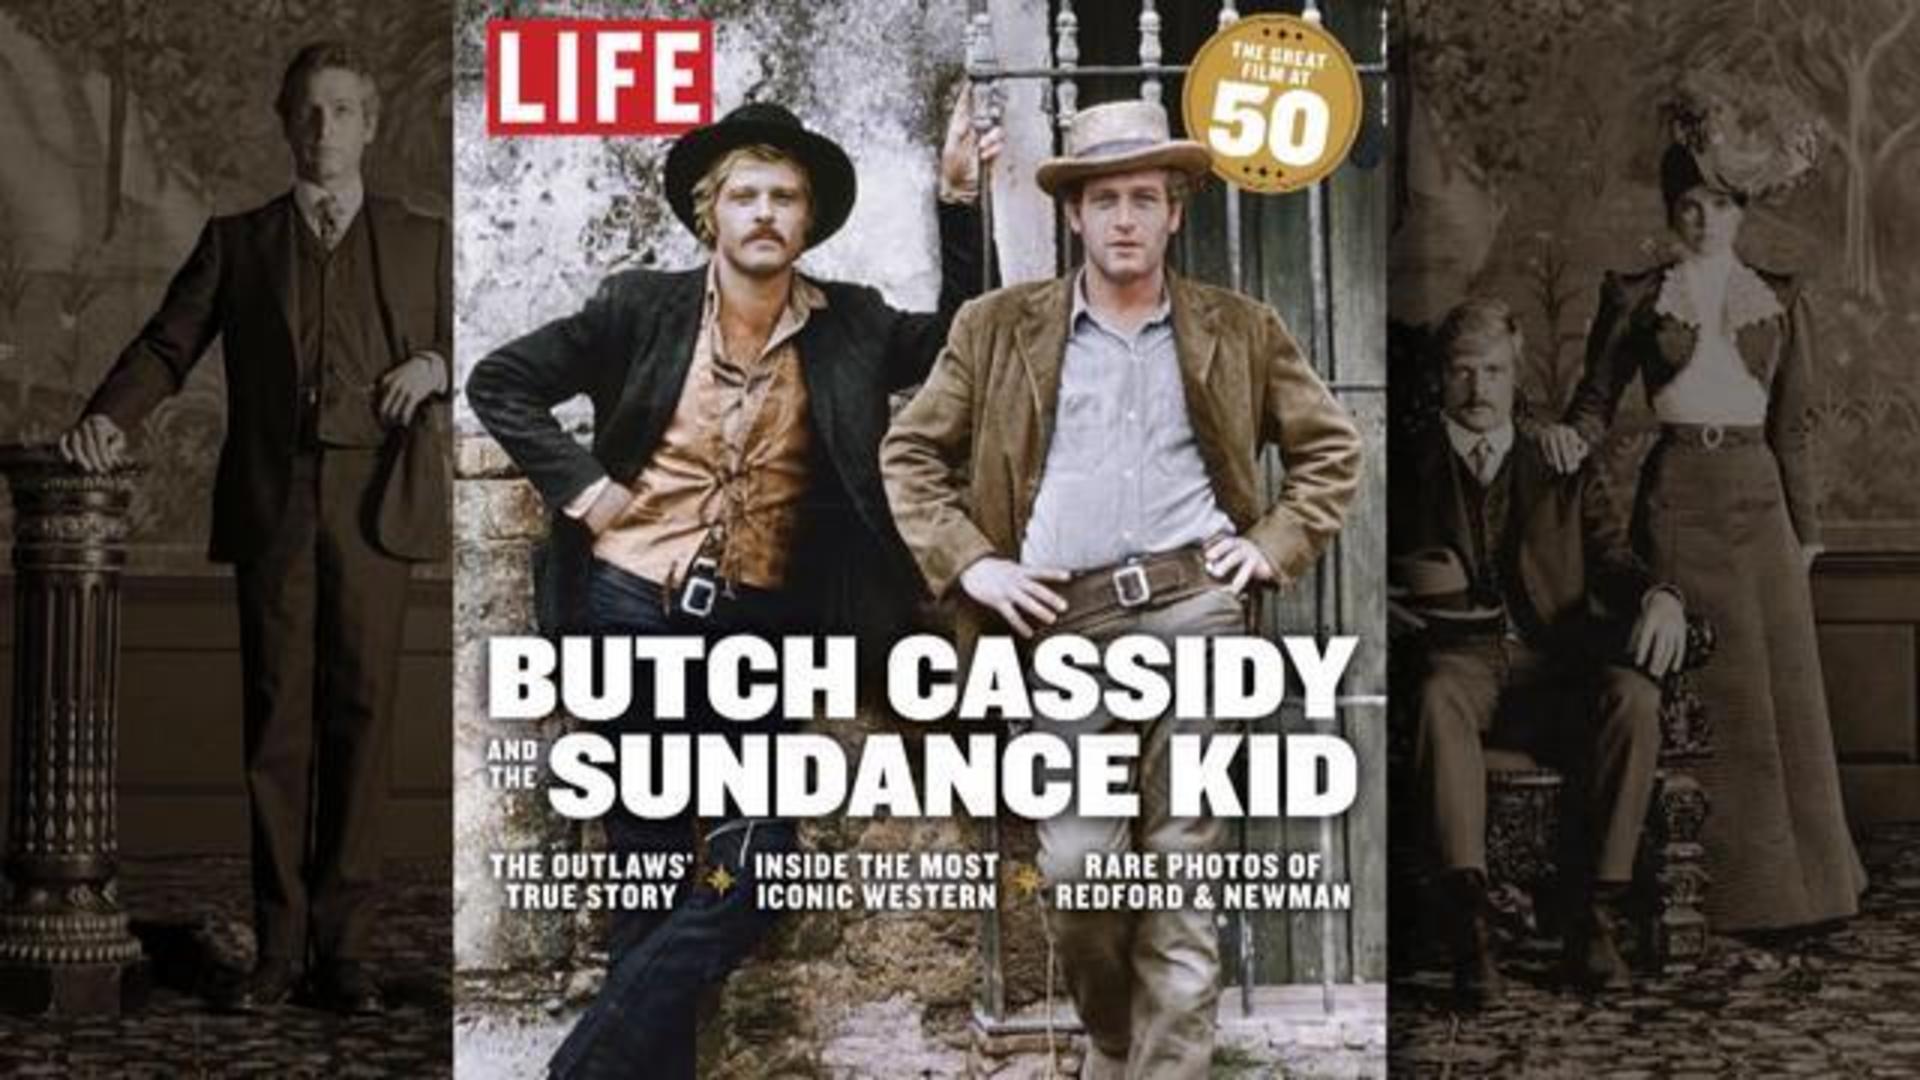 How Butch Cassidy and the Sundance Kid set a new bar for filmmaking